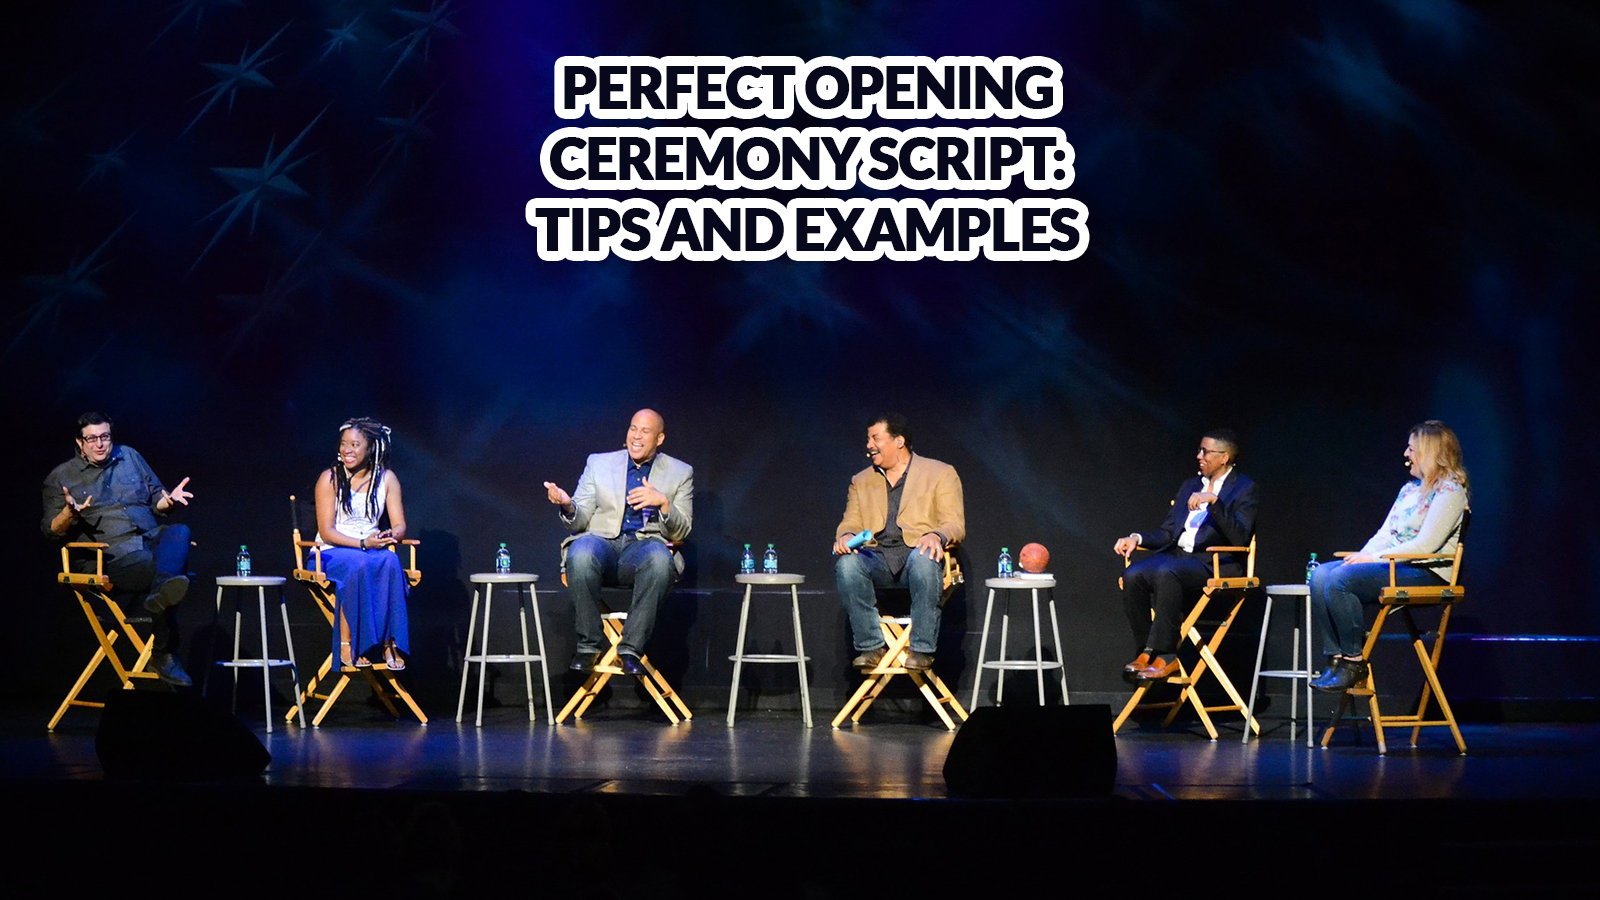 Perfect Opening Ceremony Script Tips and Examples